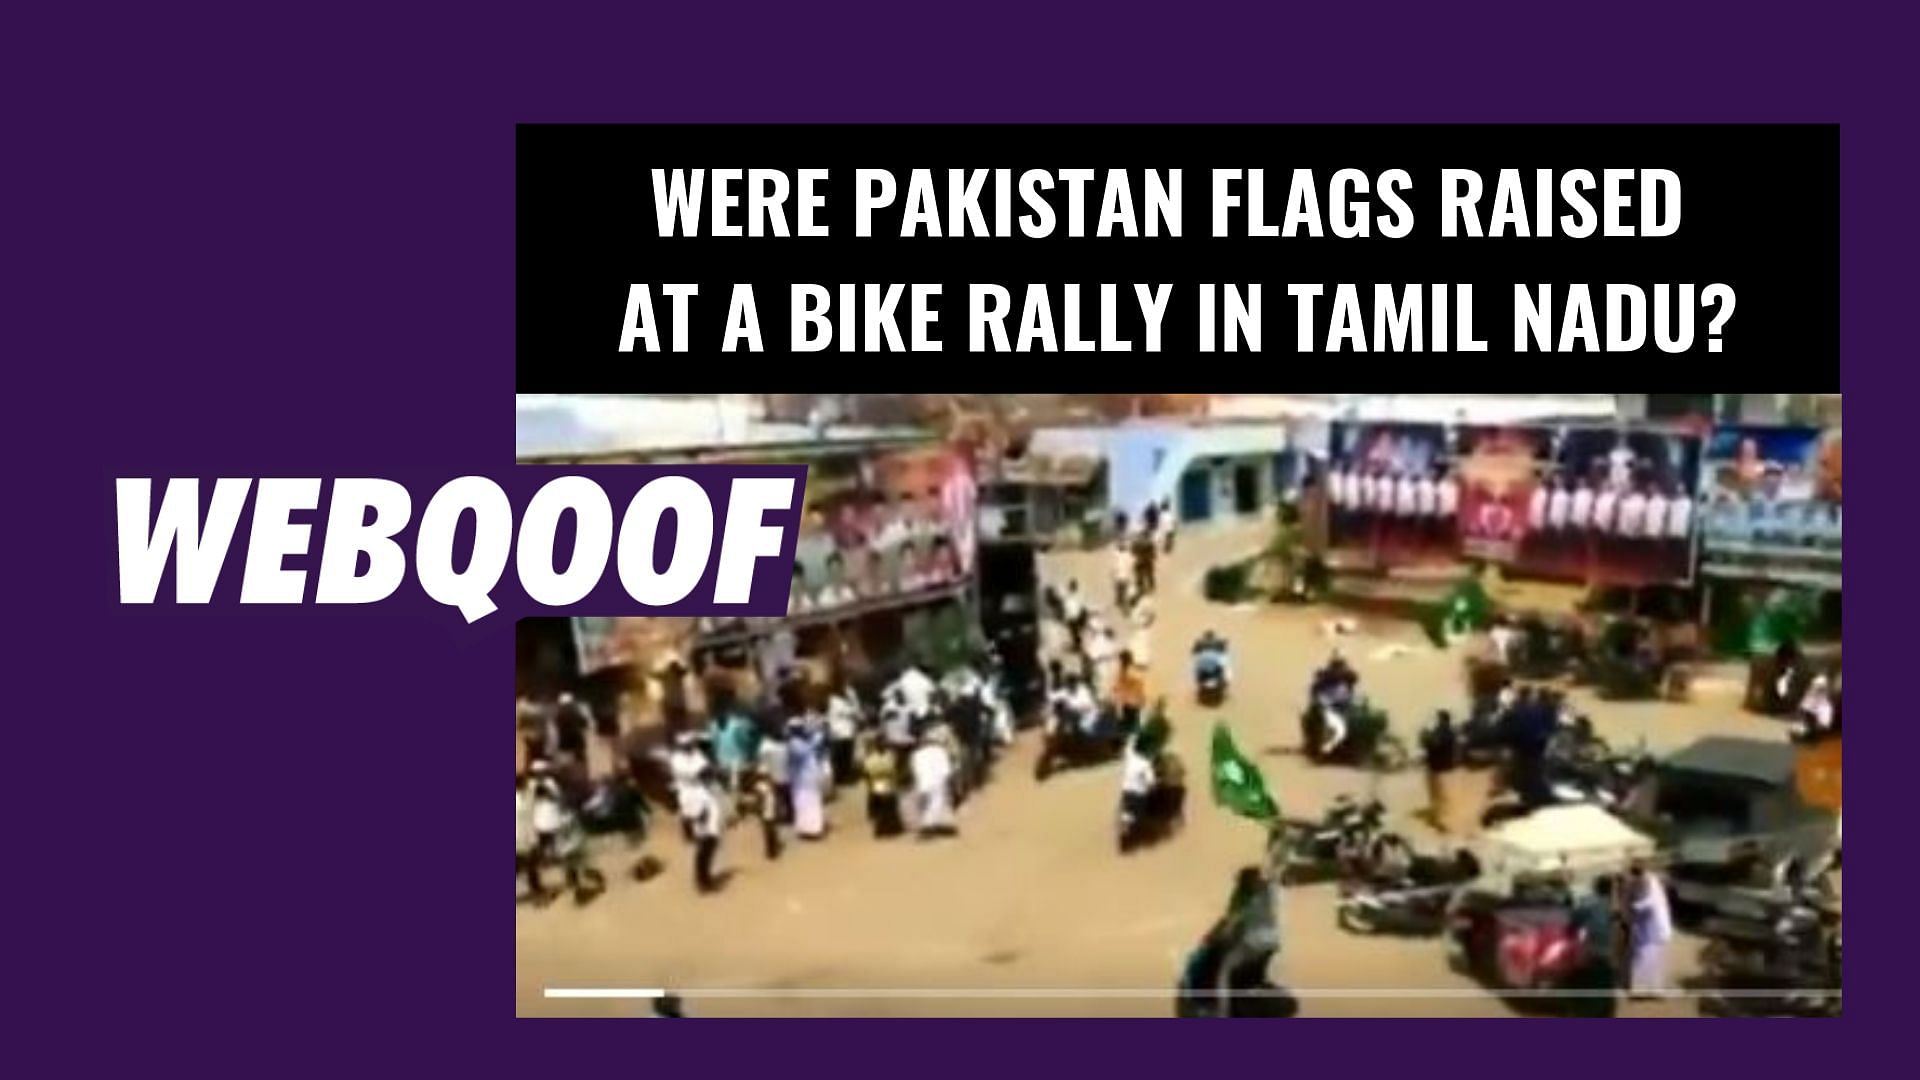 The flags shown in the video are not Pakistan flags, but flags of the Indian Union Muslim League. &nbsp;